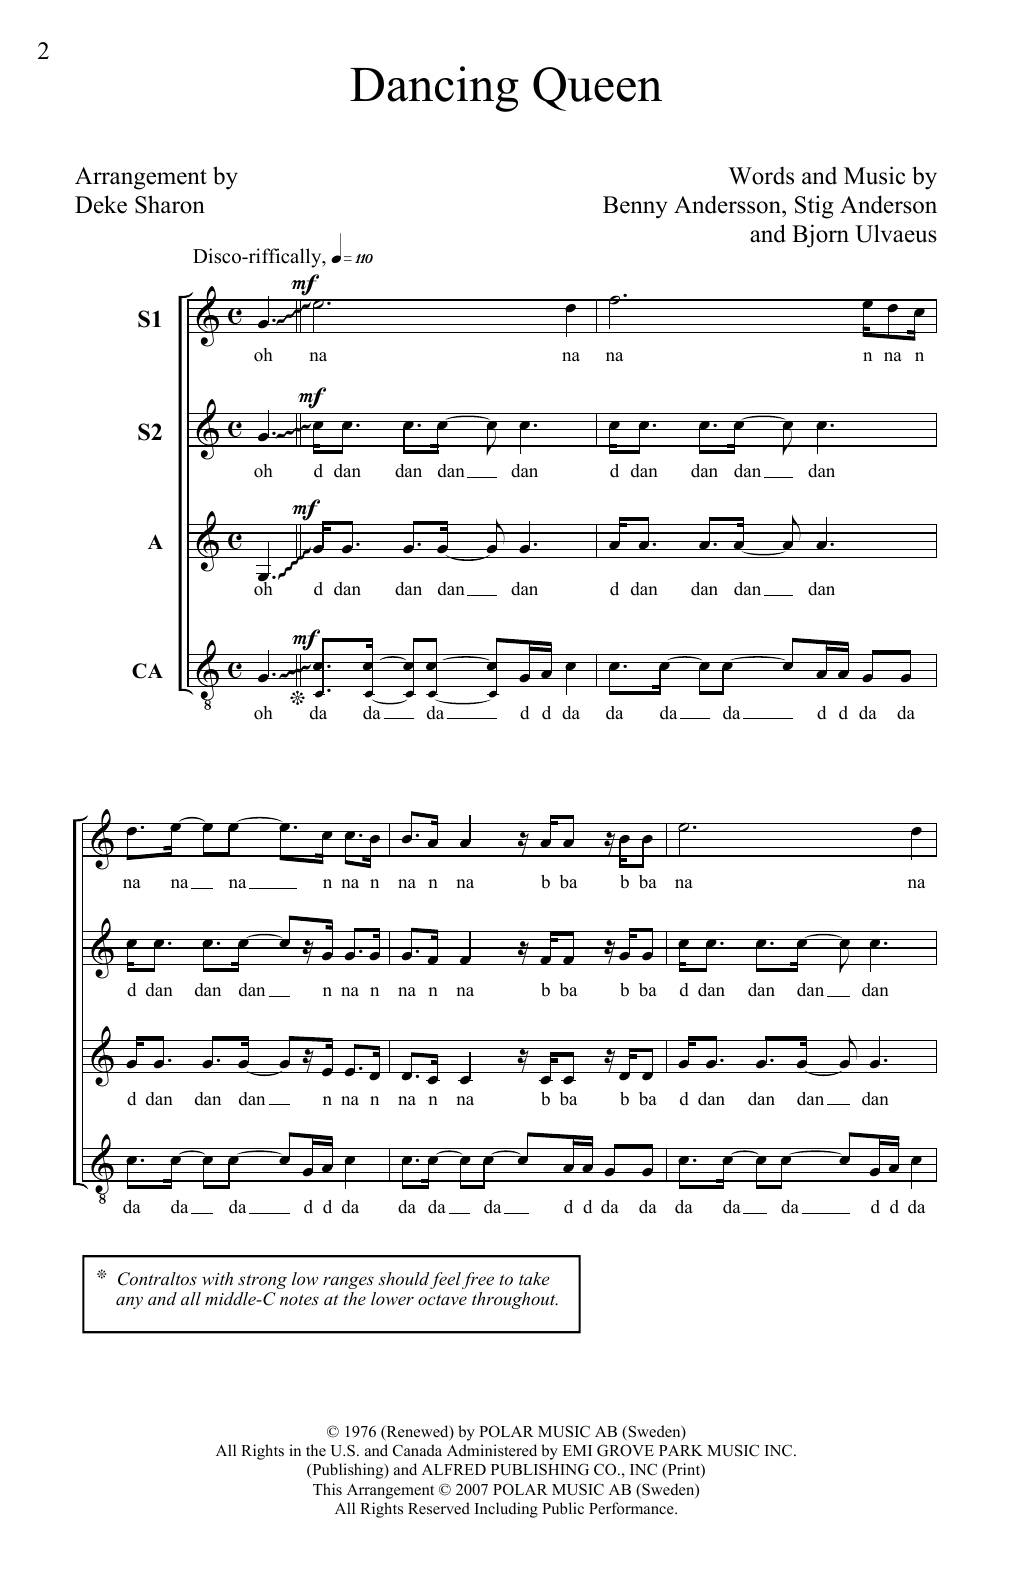 Download Deke Sharon Dancing Queen sheet music notes and chords for SSA - Download Printable PDF and start playing in minutes.